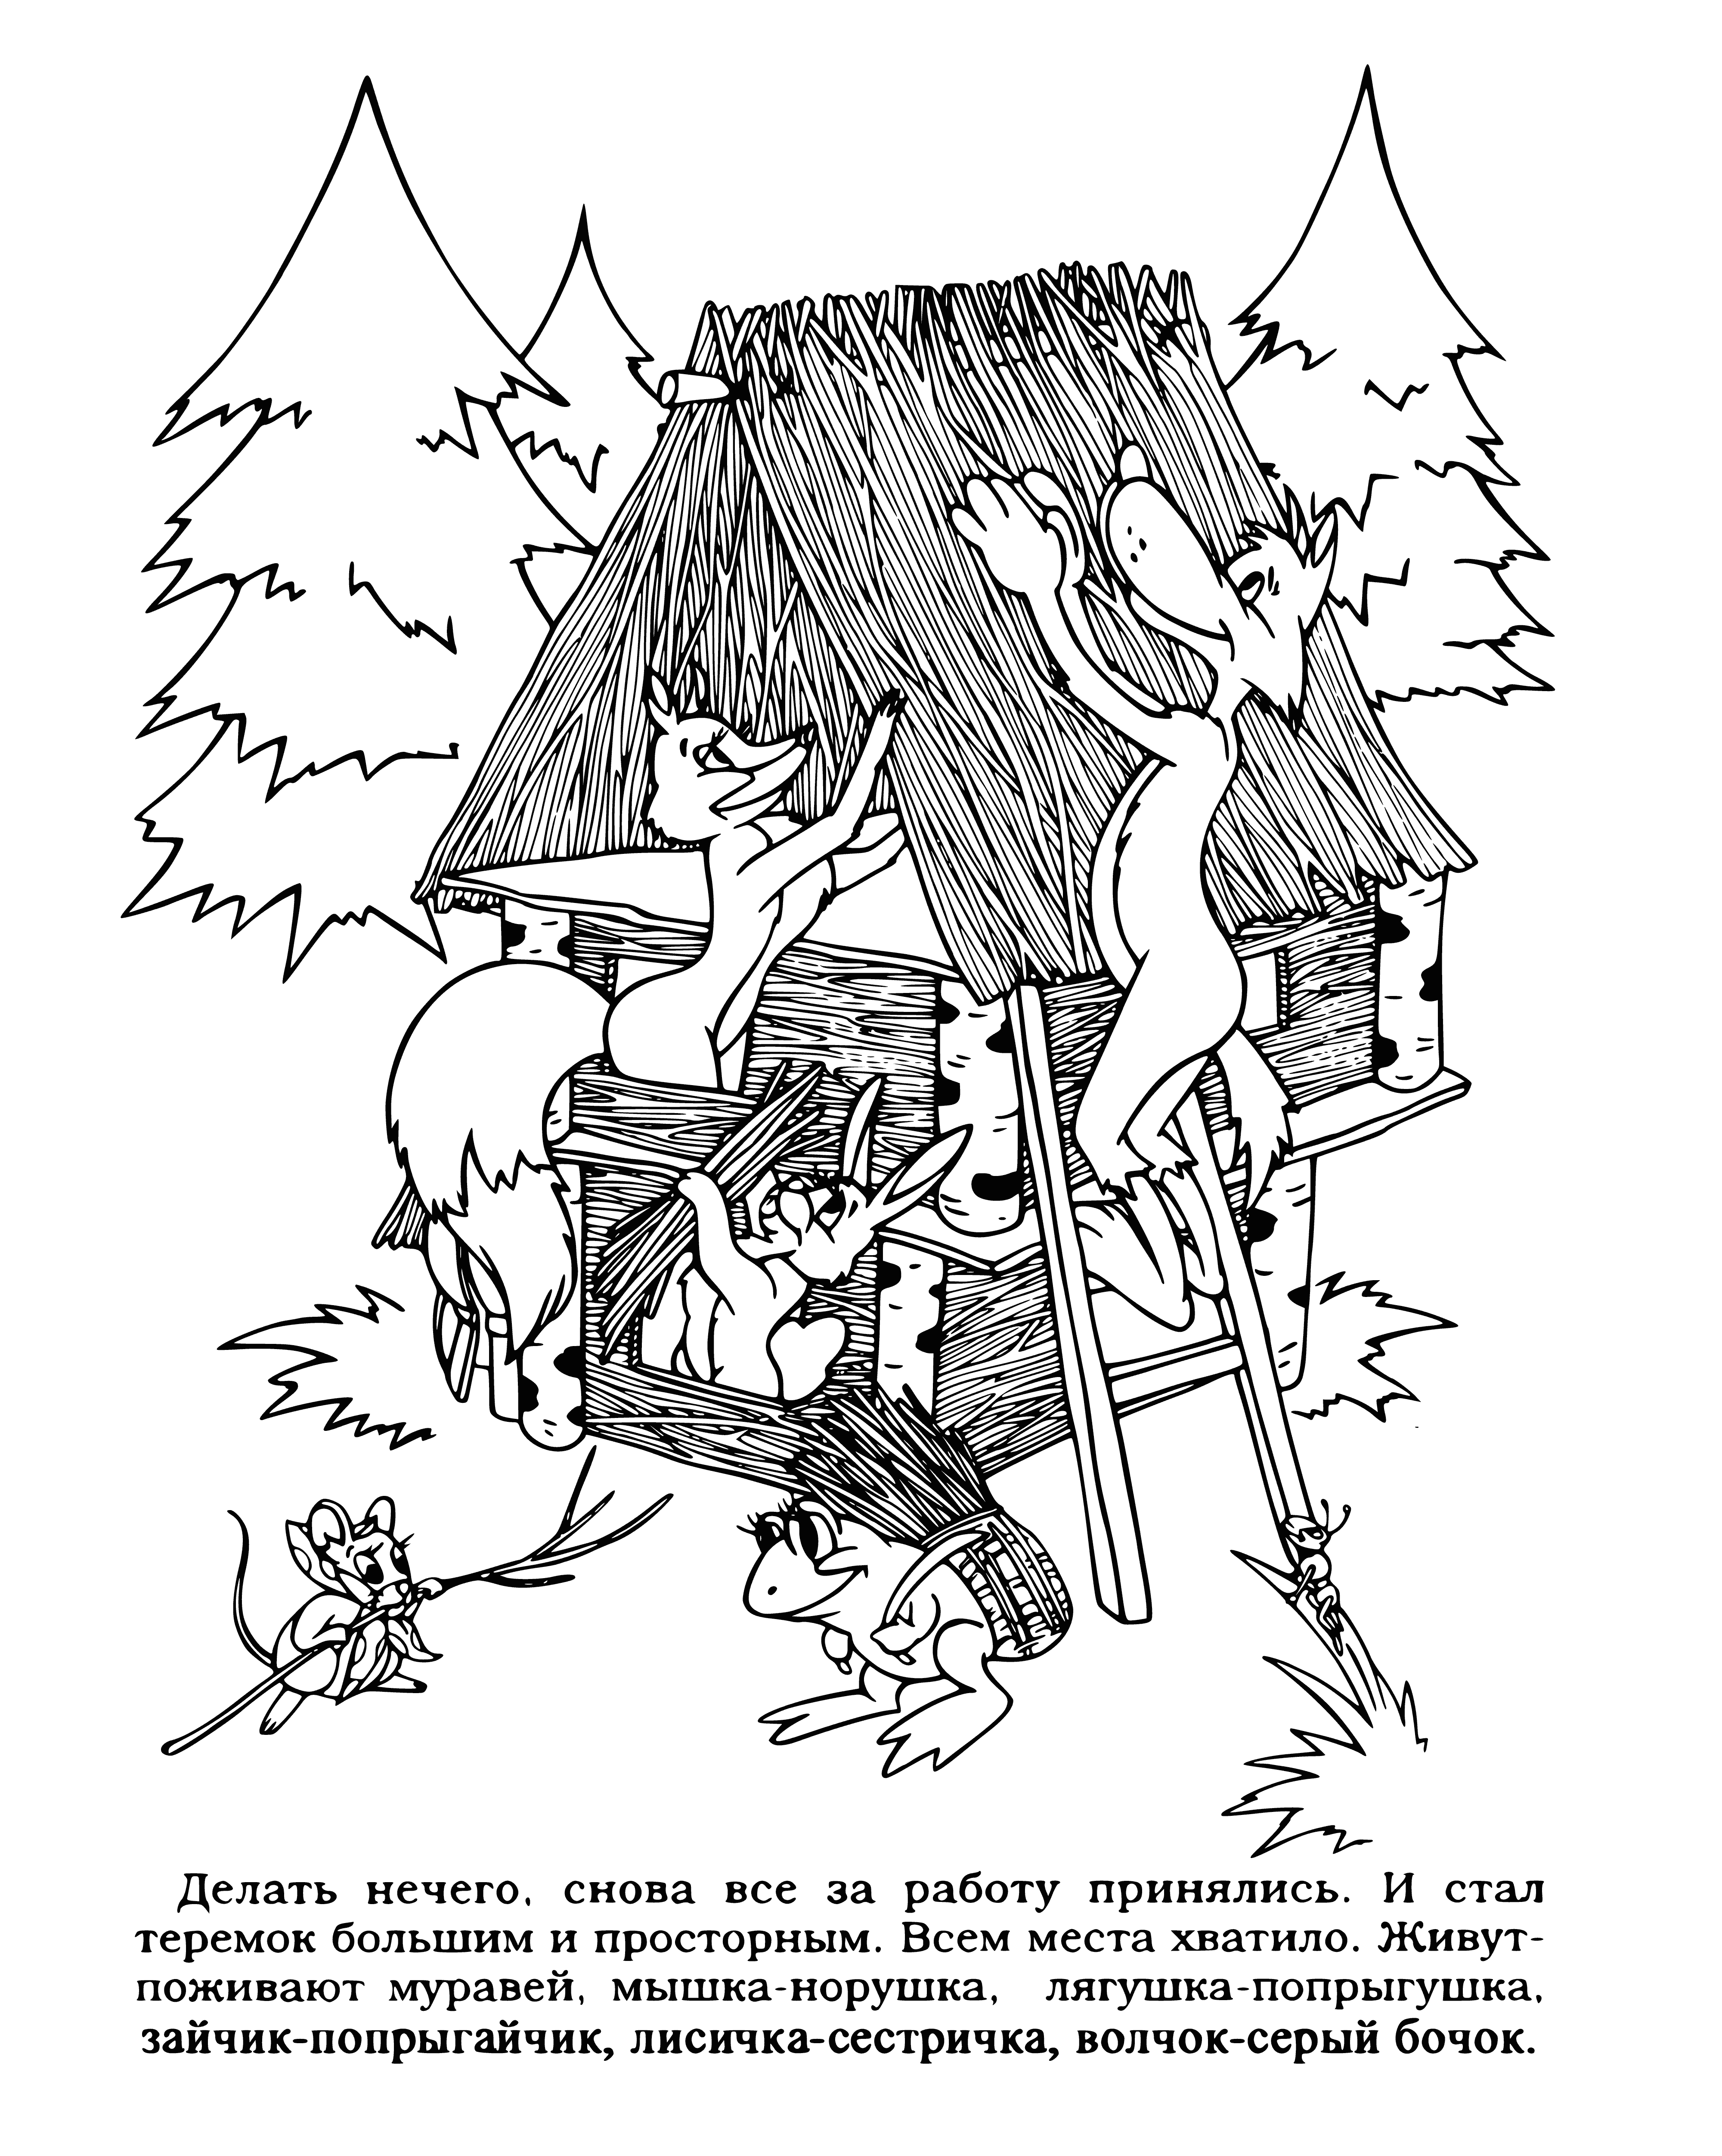 coloring page: Man sawing log in forest, wearing hat and beard.